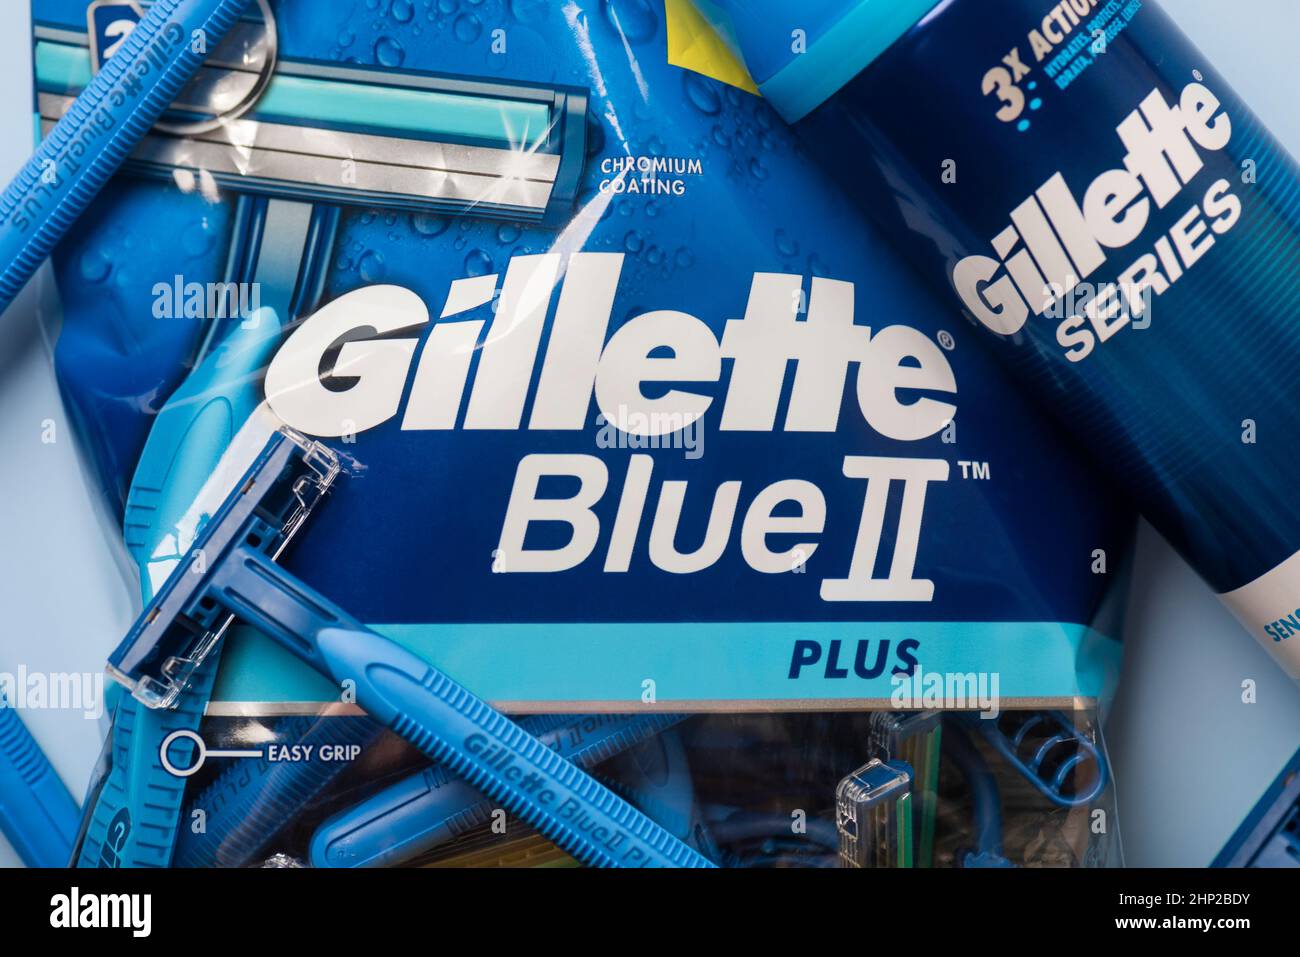 Closeup of package of Gillette Blue 2 razors and shaving foam can with Gillette Series logo lettering over blue background Stock Photo